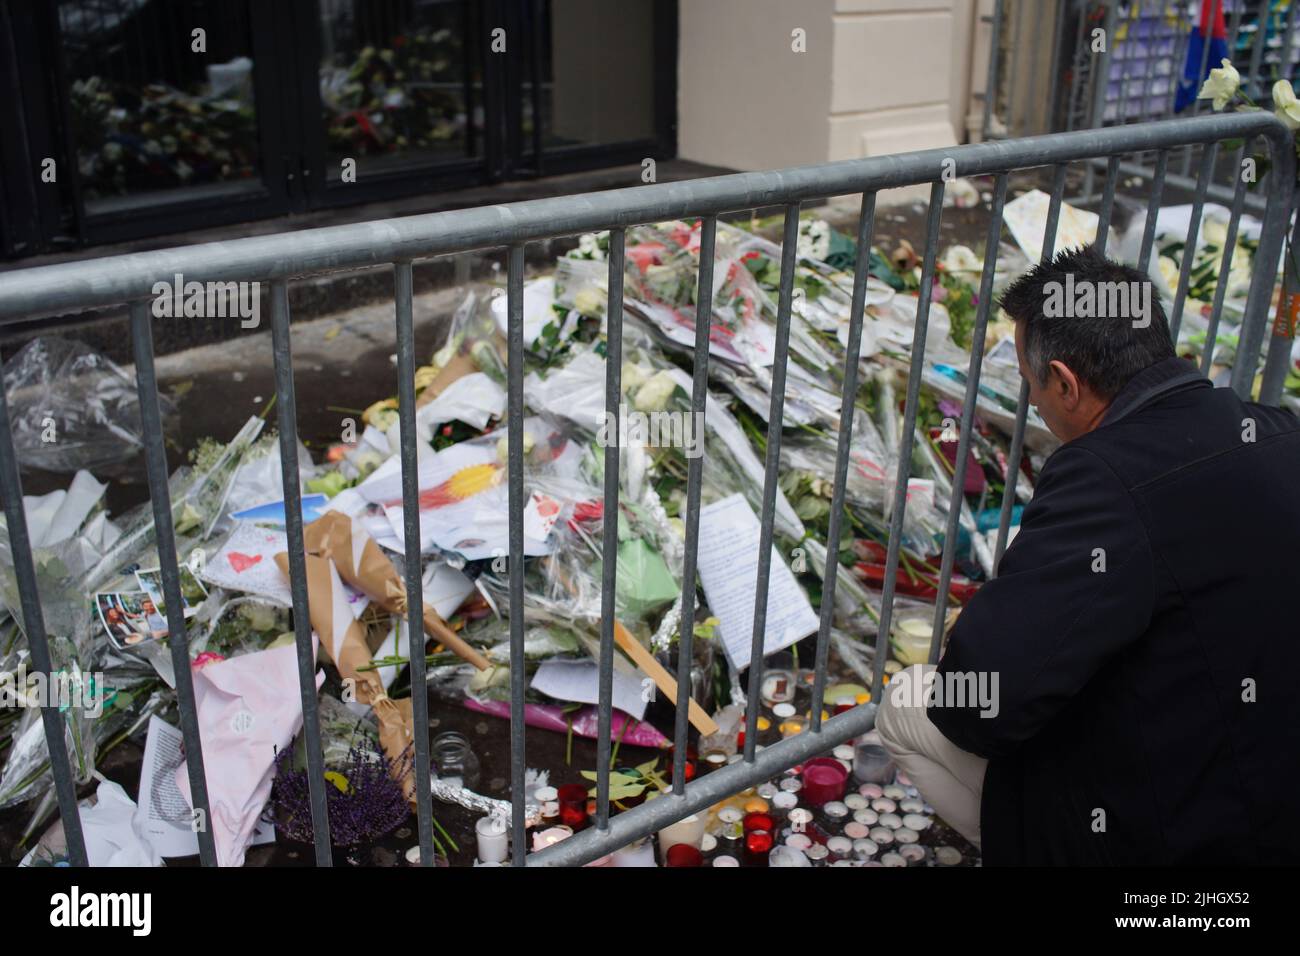 Man looks at flowers, candles and messages outside the Bataclan music venue, Paris, to commemorate victims of November 2015 Paris attacks. Le Bataclan, 50 Boulevard Voltaire, Paris, France - Paris terror attacks - one year on Stock Photo